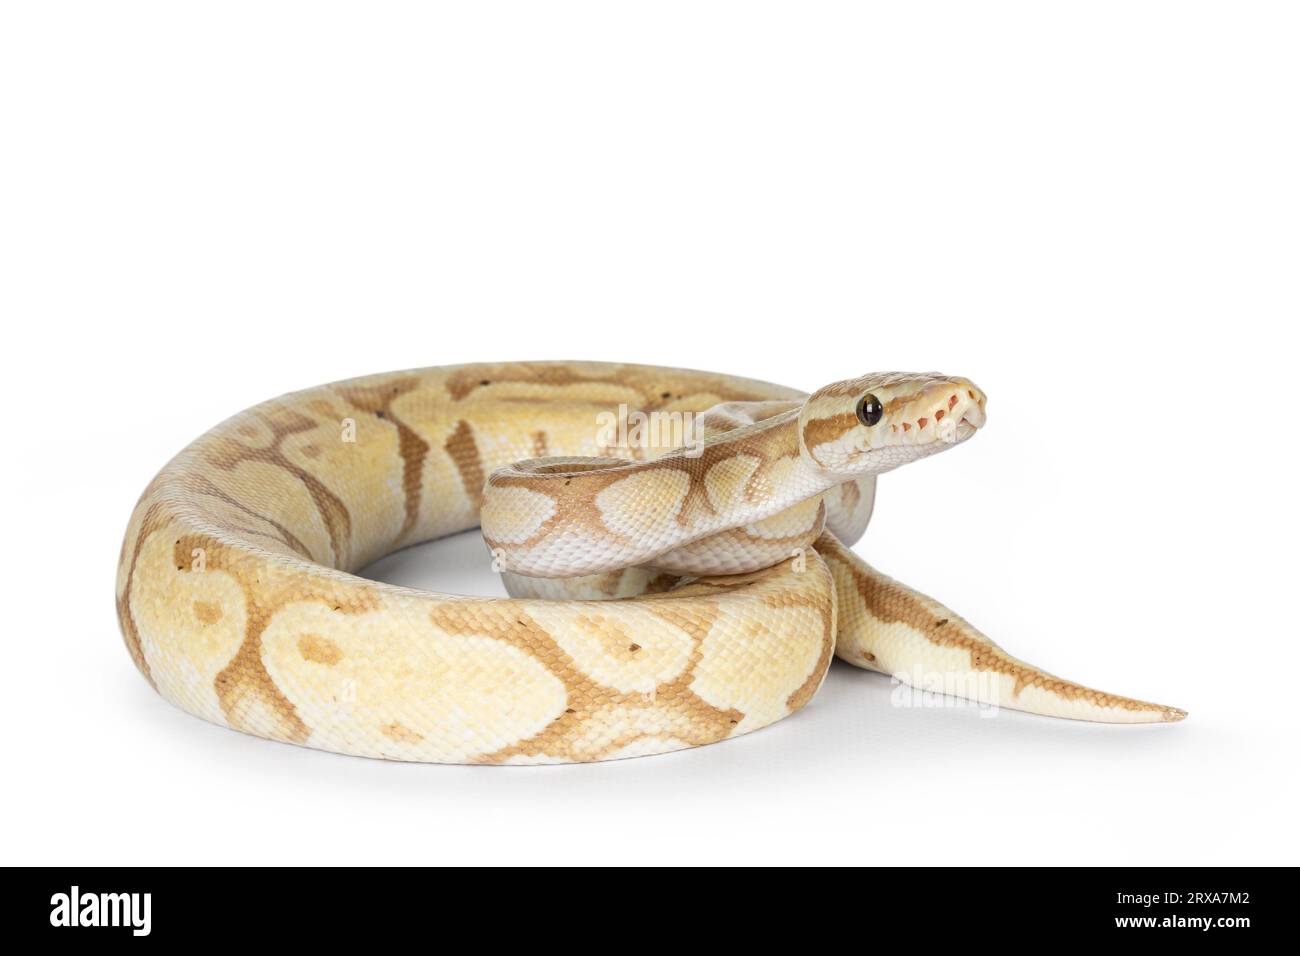 Cute yellowish ball python, curled up. Head on body, looking side ways. Isolated on a white background. Stock Photo